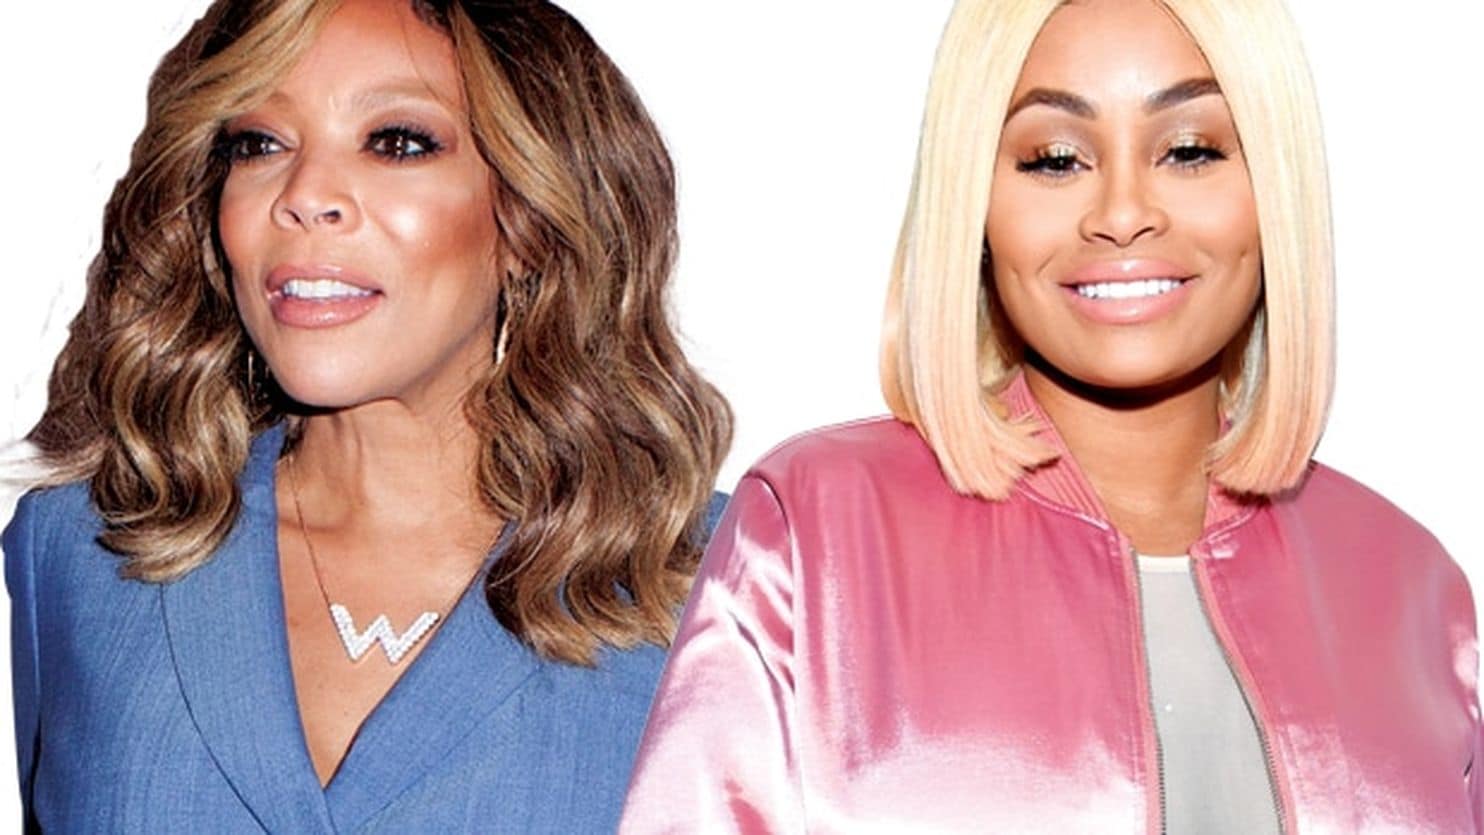 Blac Chyna Reveals Some Juicy Details On Her And Rob Kardashian's Relationship On Wendy Williams' Show While Rob Posts Their Daughter On Social Media - Would Chyna Get Back Together With Dream's Daddy?